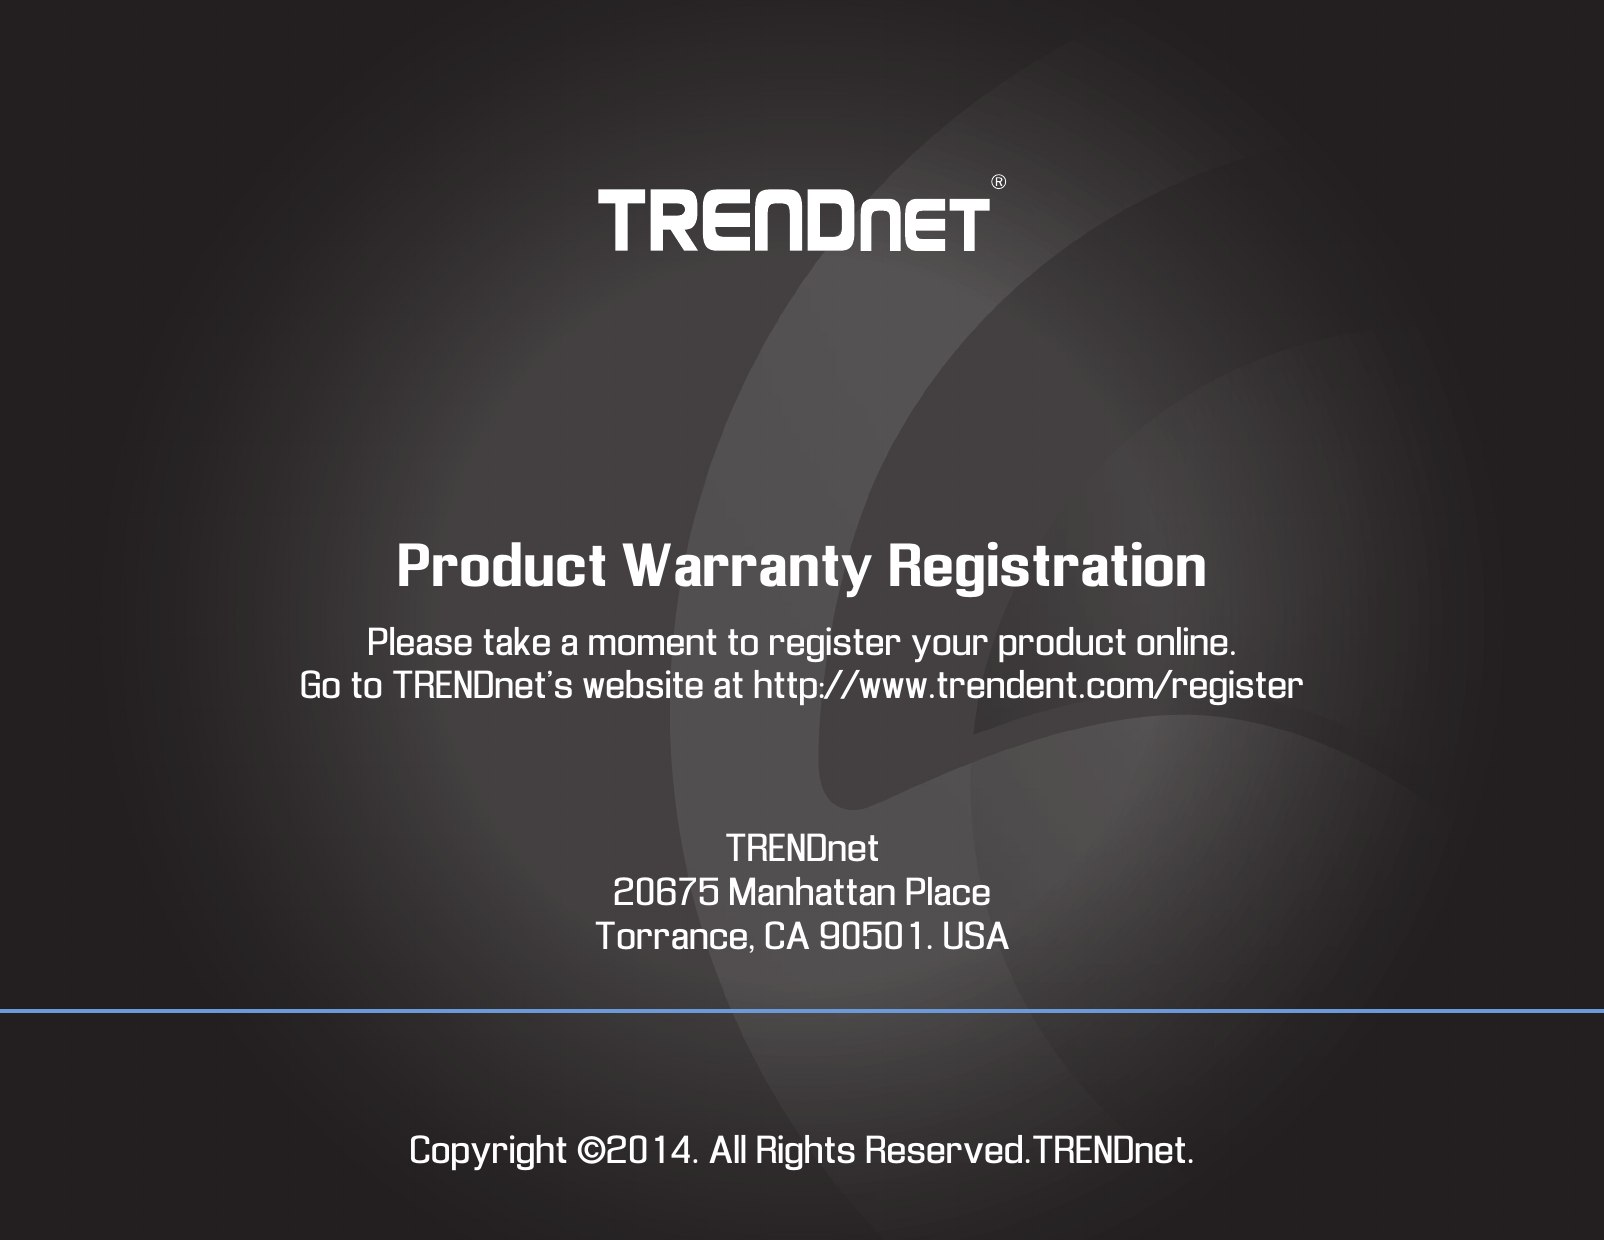 Product Warranty RegistrationPlease take a moment to register your product online.Go to TRENDnet’s website at http://www.trendent.com/registerTRENDnet20675 Manhattan PlaceTorrance, CA 90501. USACopyright ©2014. All Rights Reserved.TRENDnet.